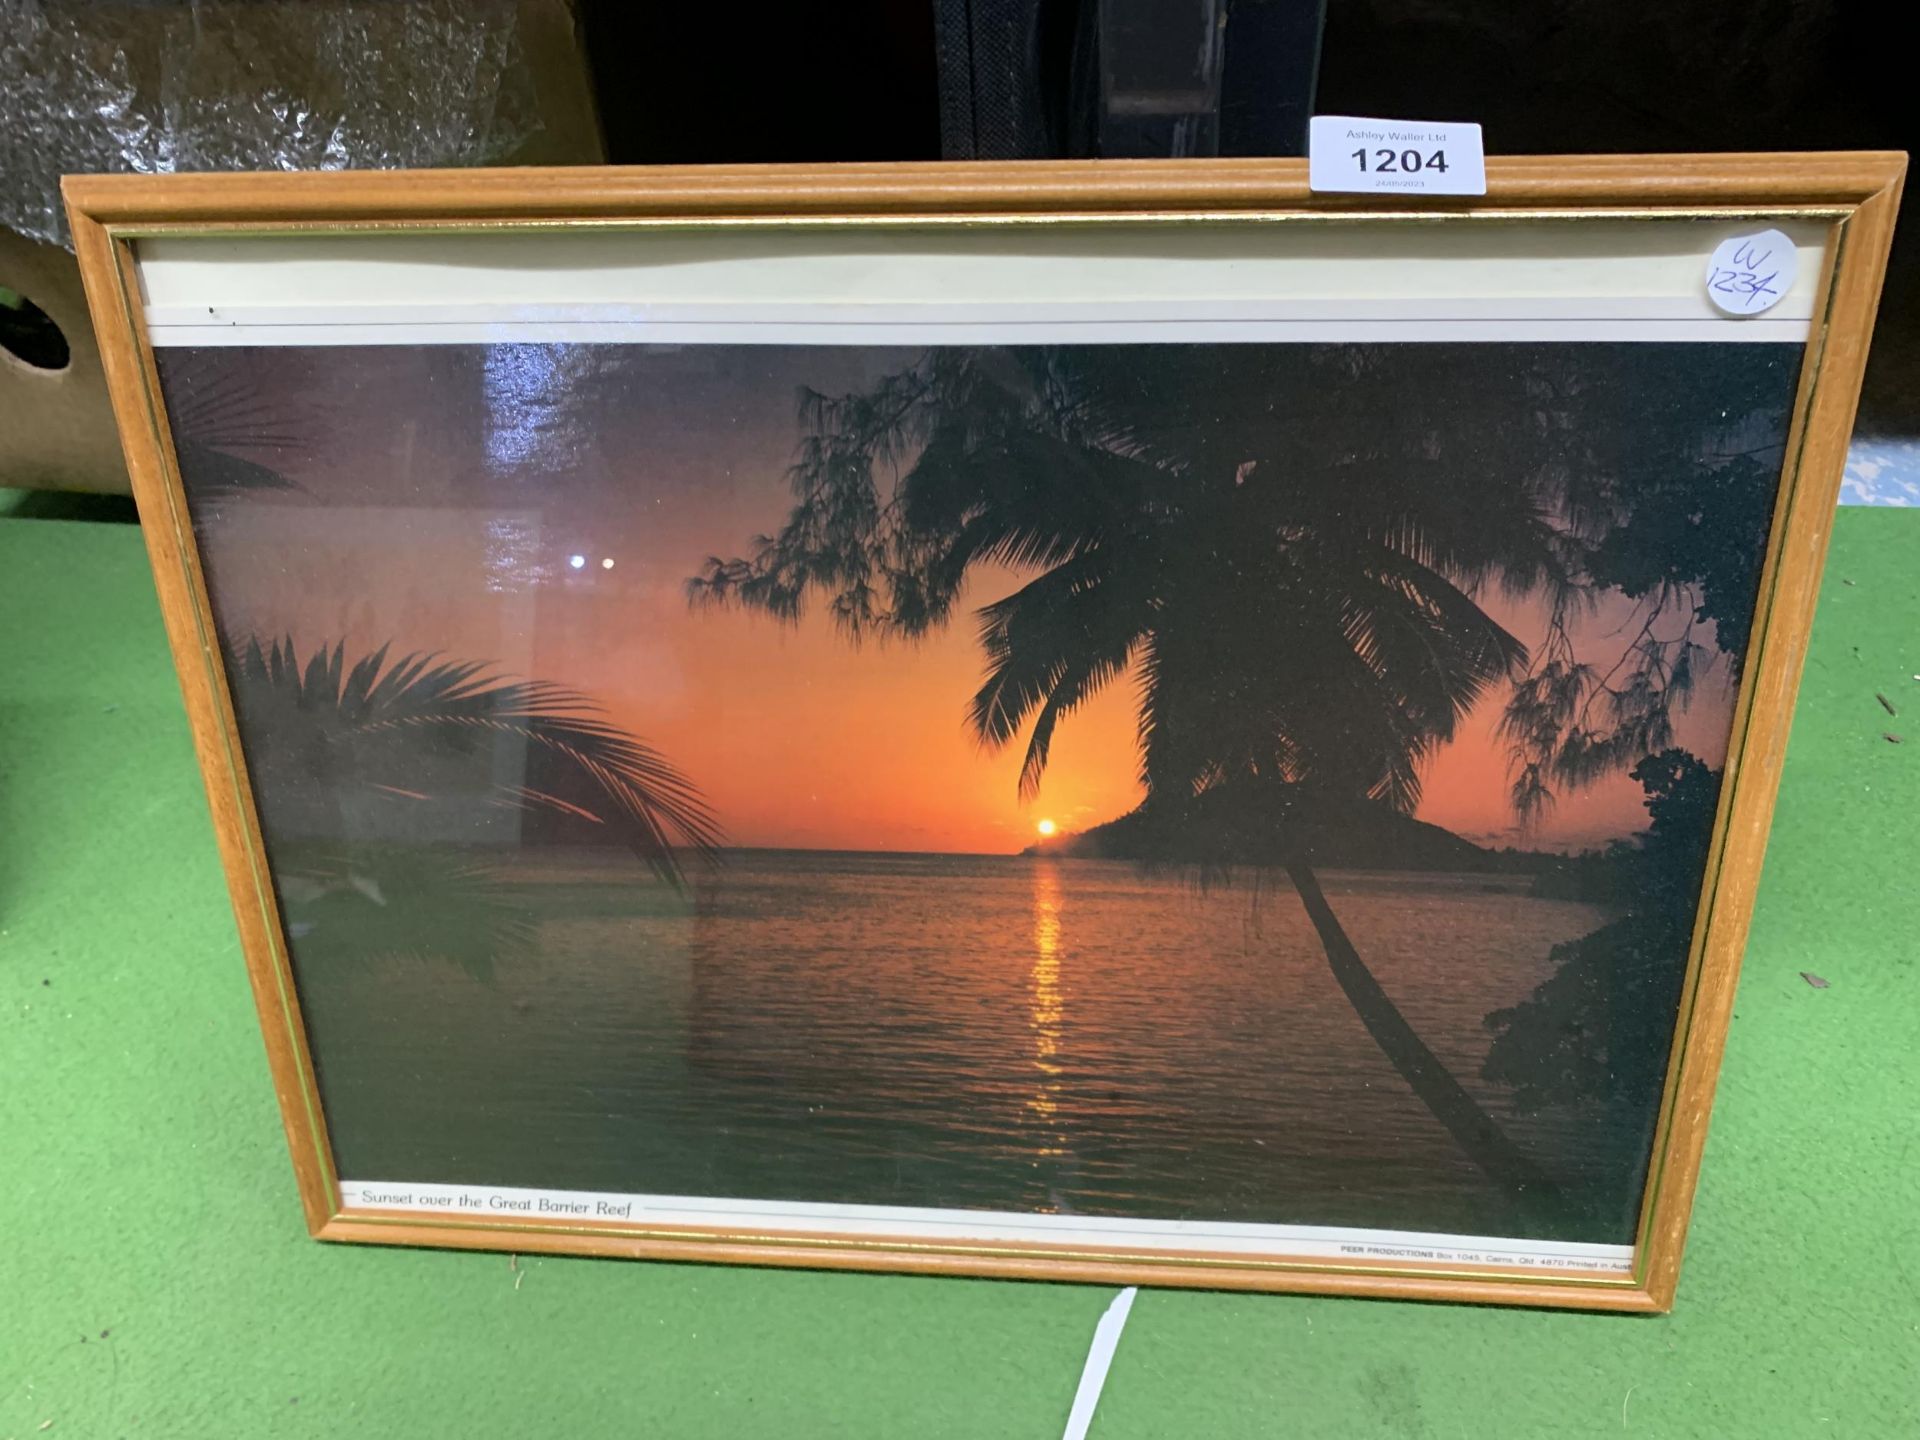 TWO FRAMED PRINTS, ONE OF SUNSET OVER THE GREAT BARRIER REEF, THE OTHER FOUR MILE BEACH, PORT - Image 3 of 4